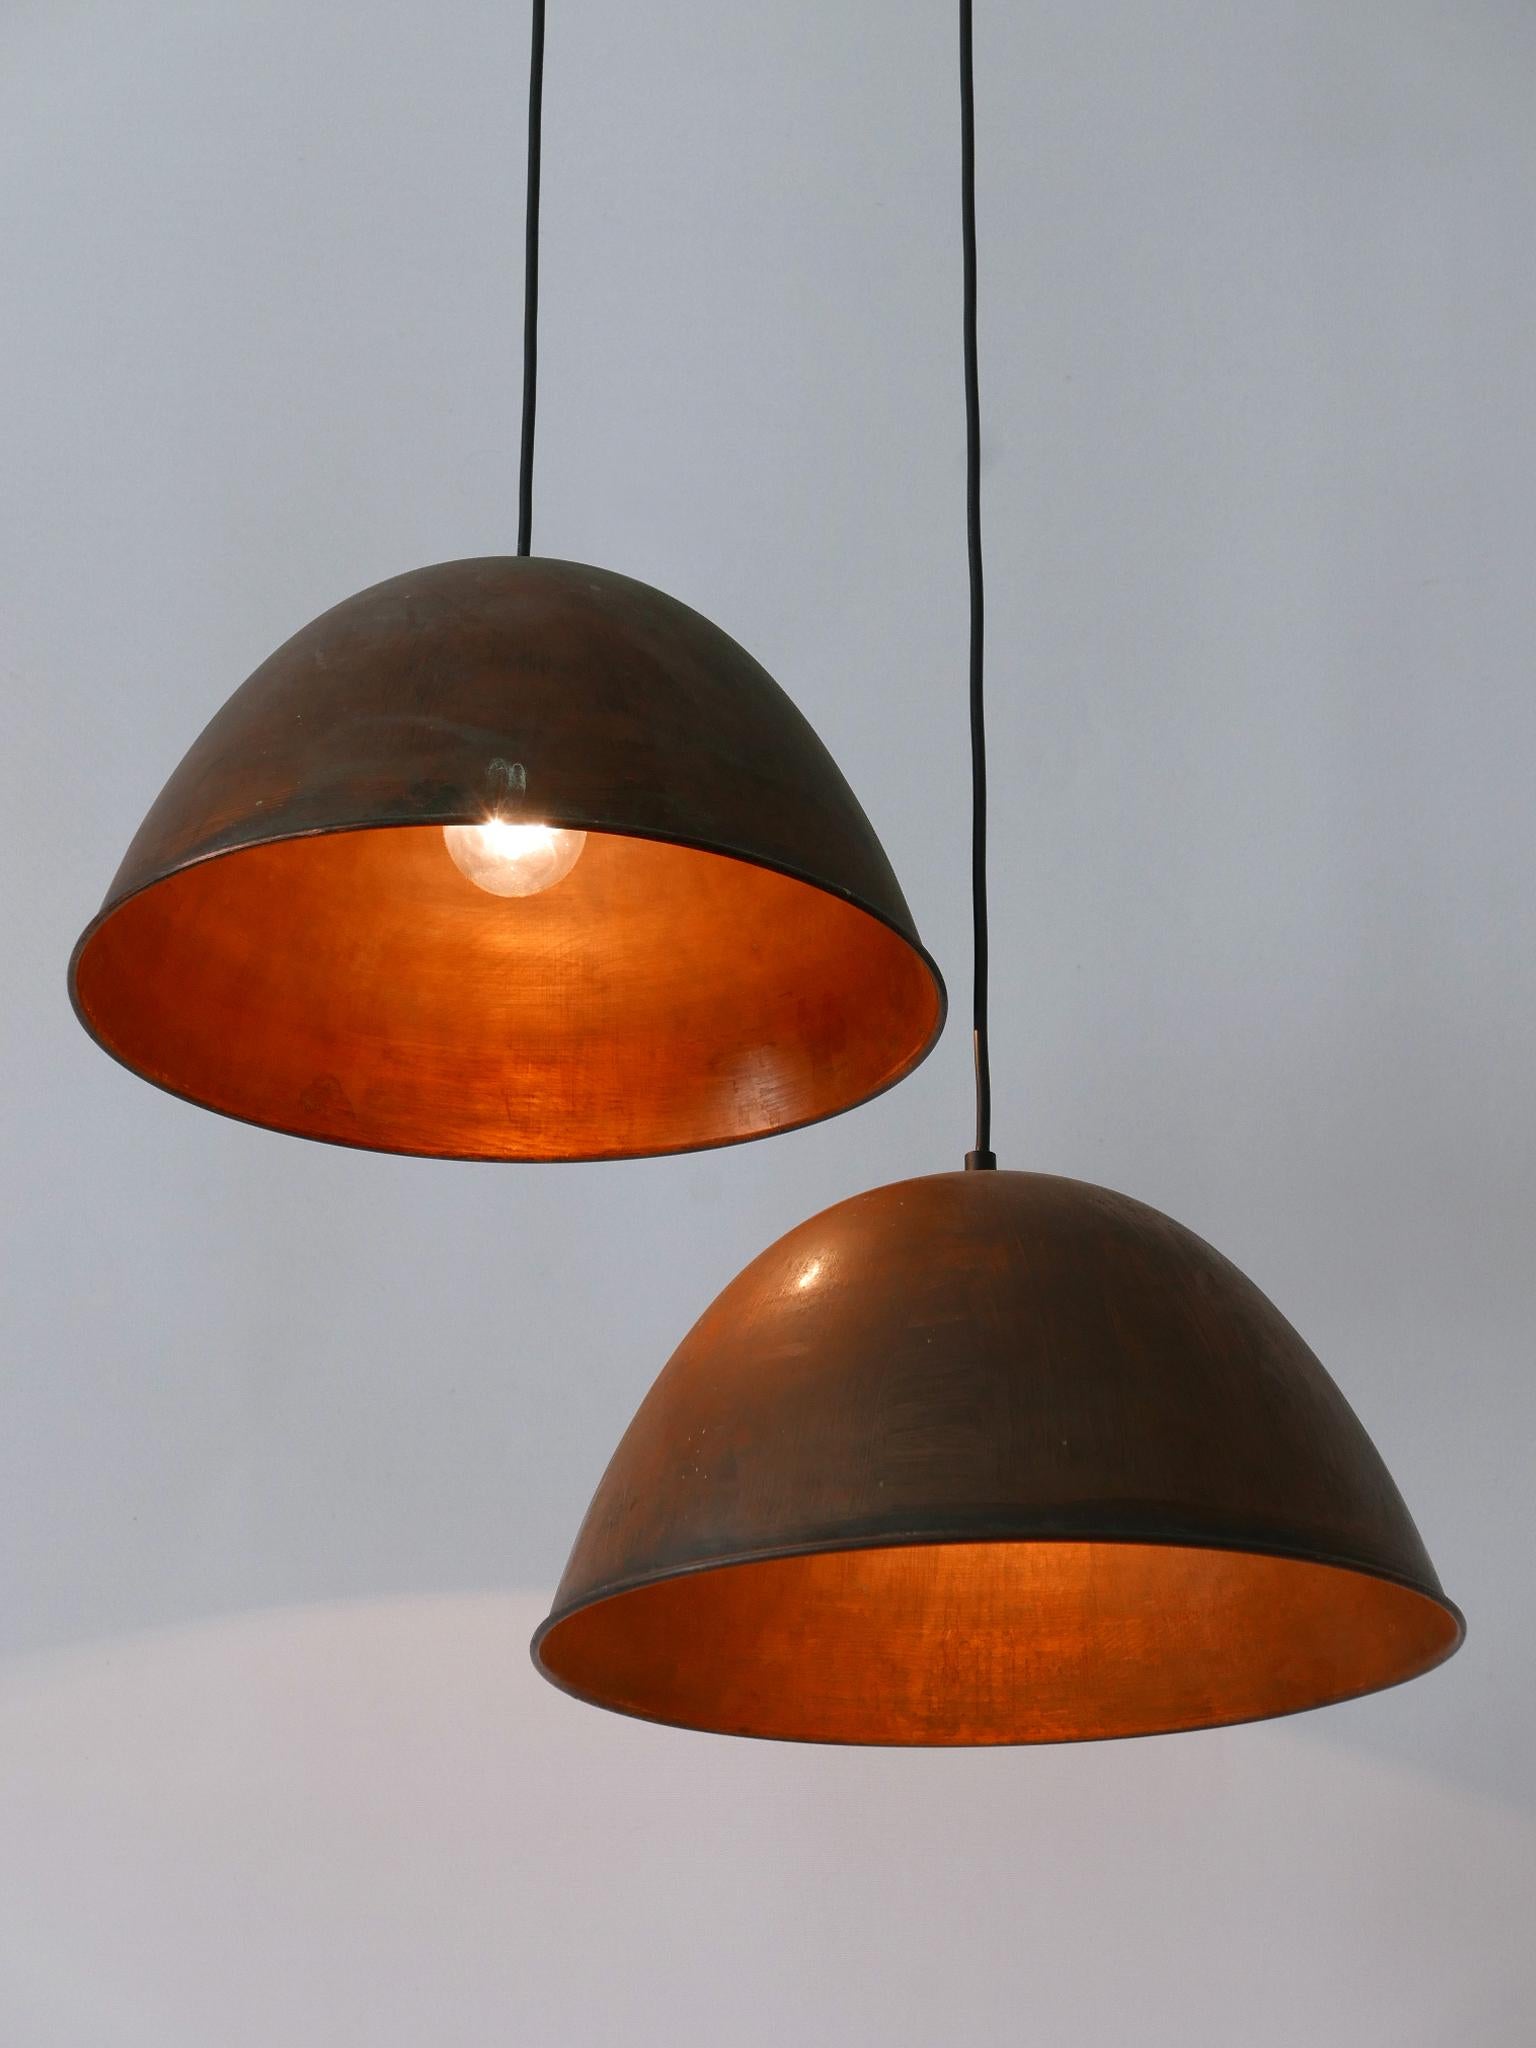 Set of Two Mid-Century Modern Copper Pendant Lamps or Hanging Lights 1950s For Sale 9